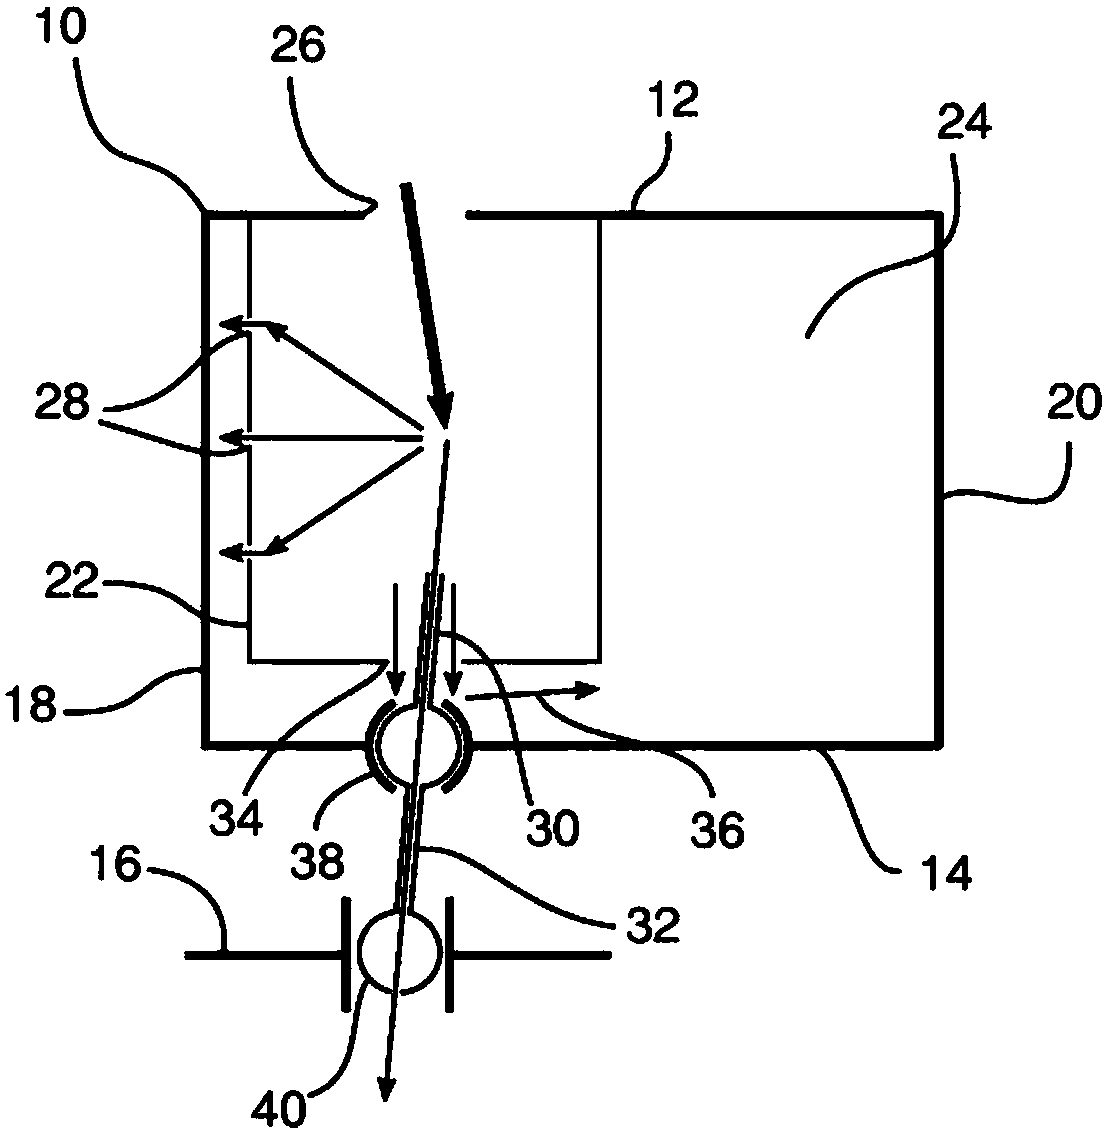 Blade equipped with a cooling system, associated guide vanes assembly and associated turbomachine